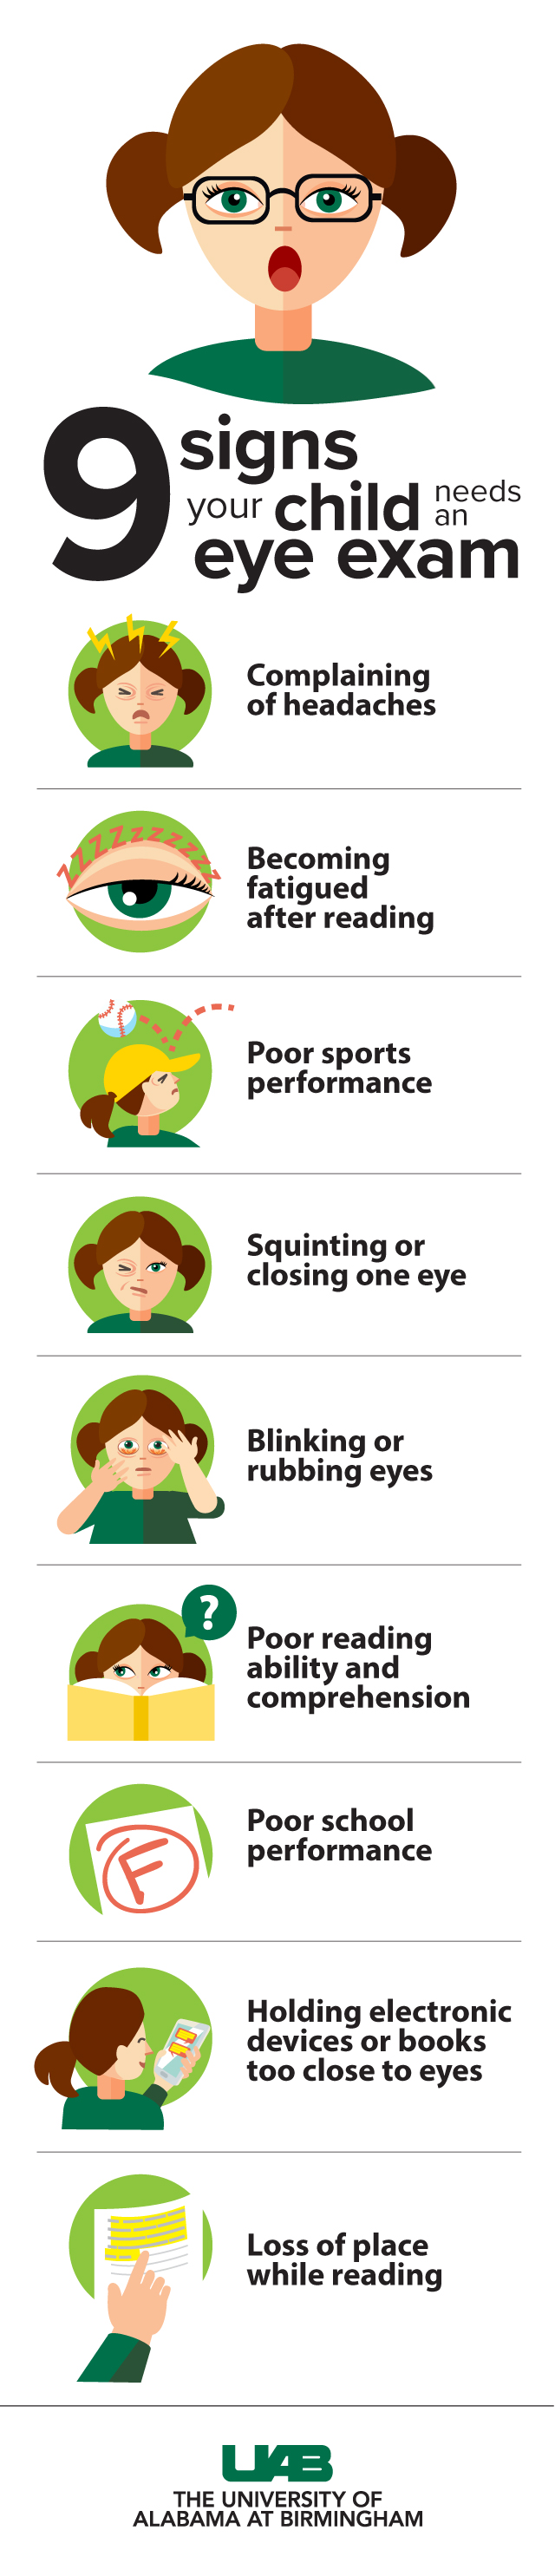 simplified 9 signs child may need eye exam graphic